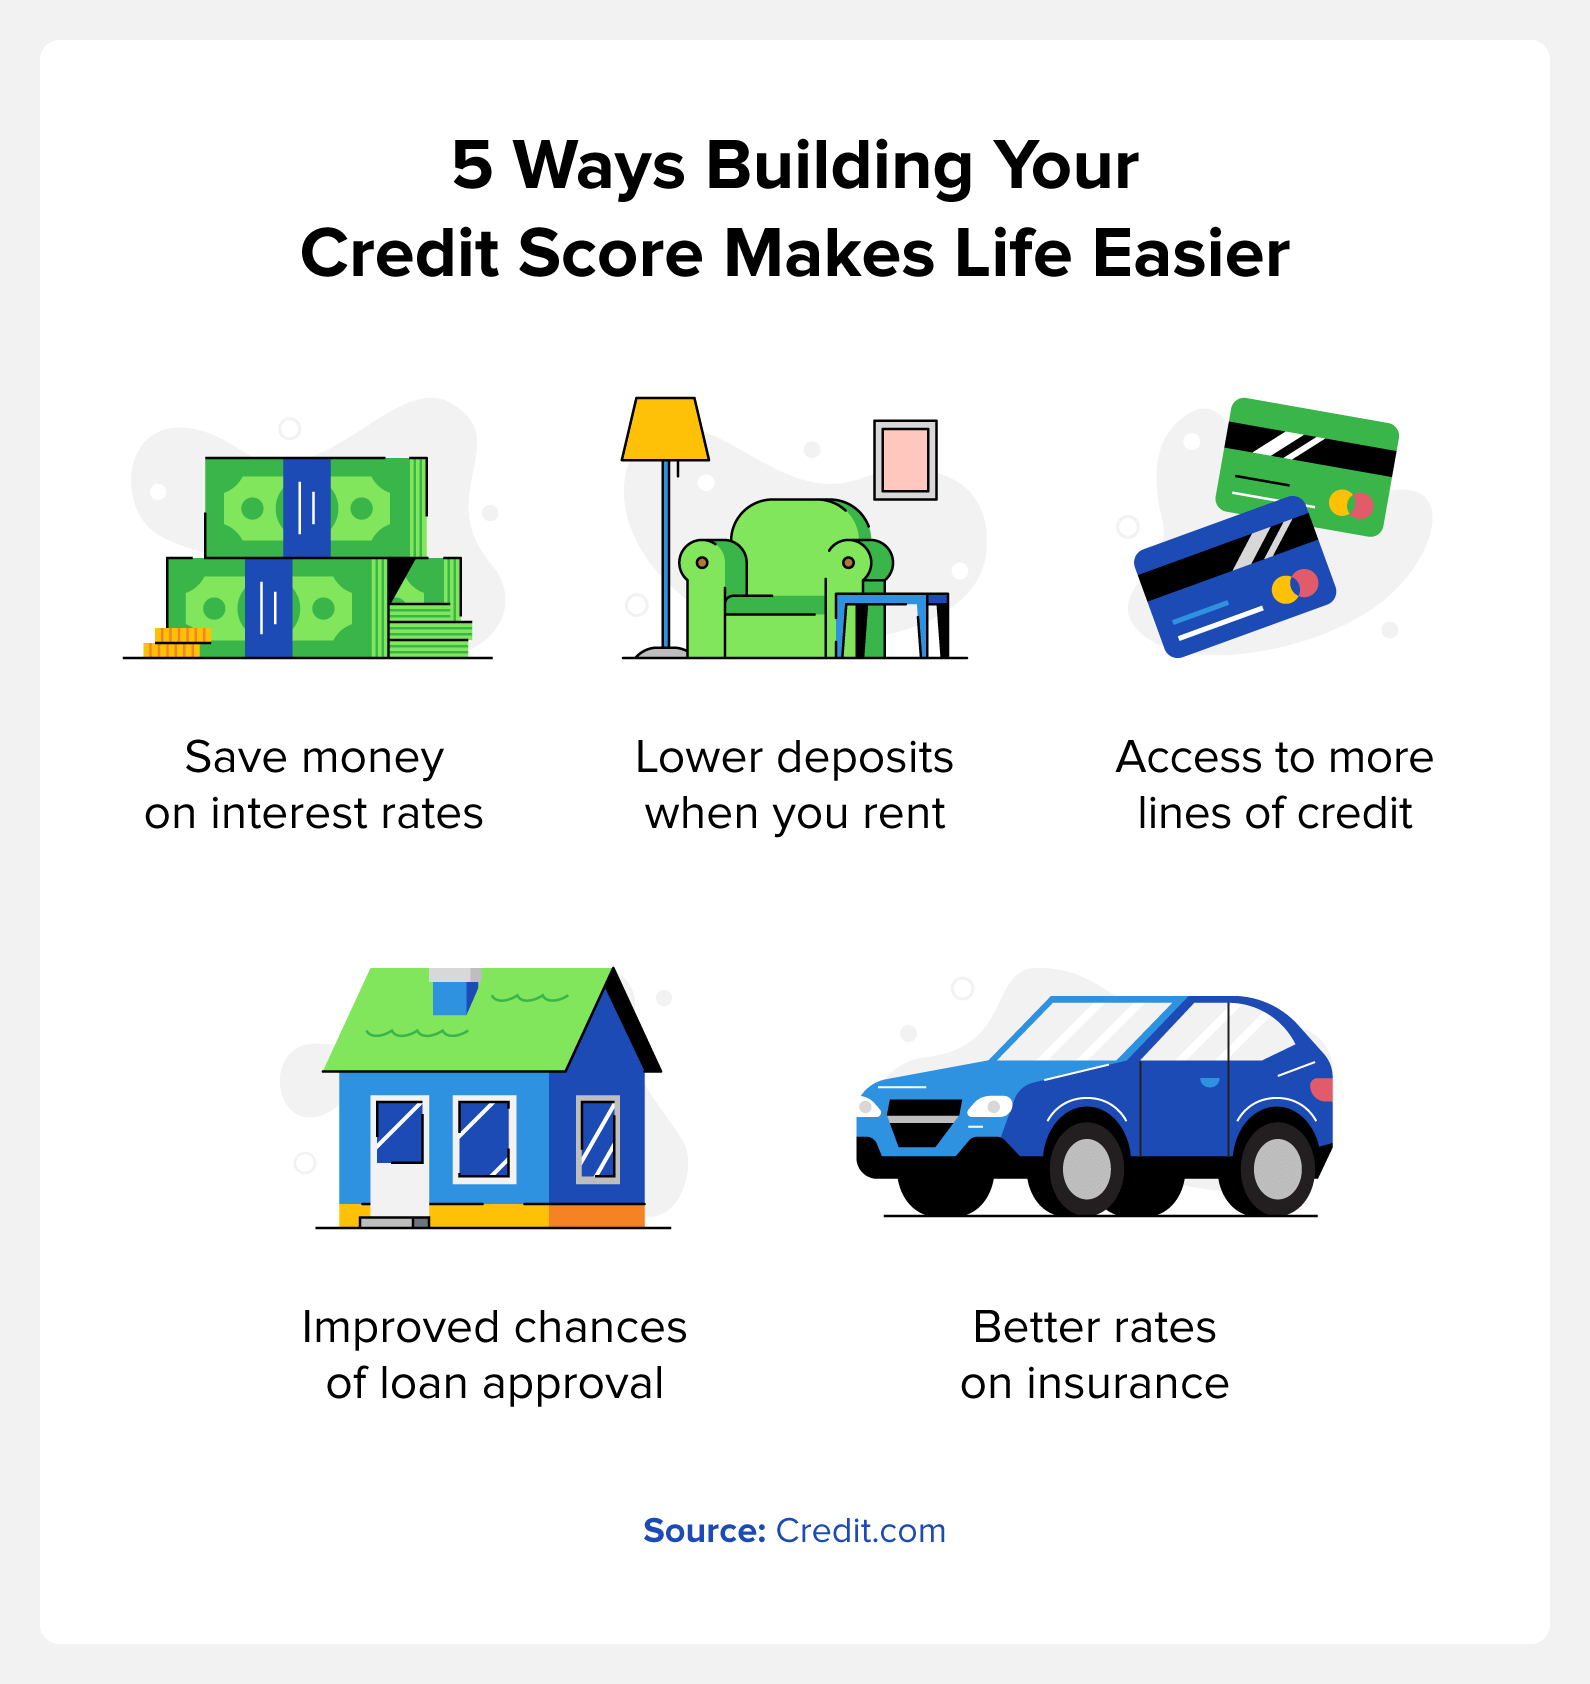 5 ways building your credit score makes life easier